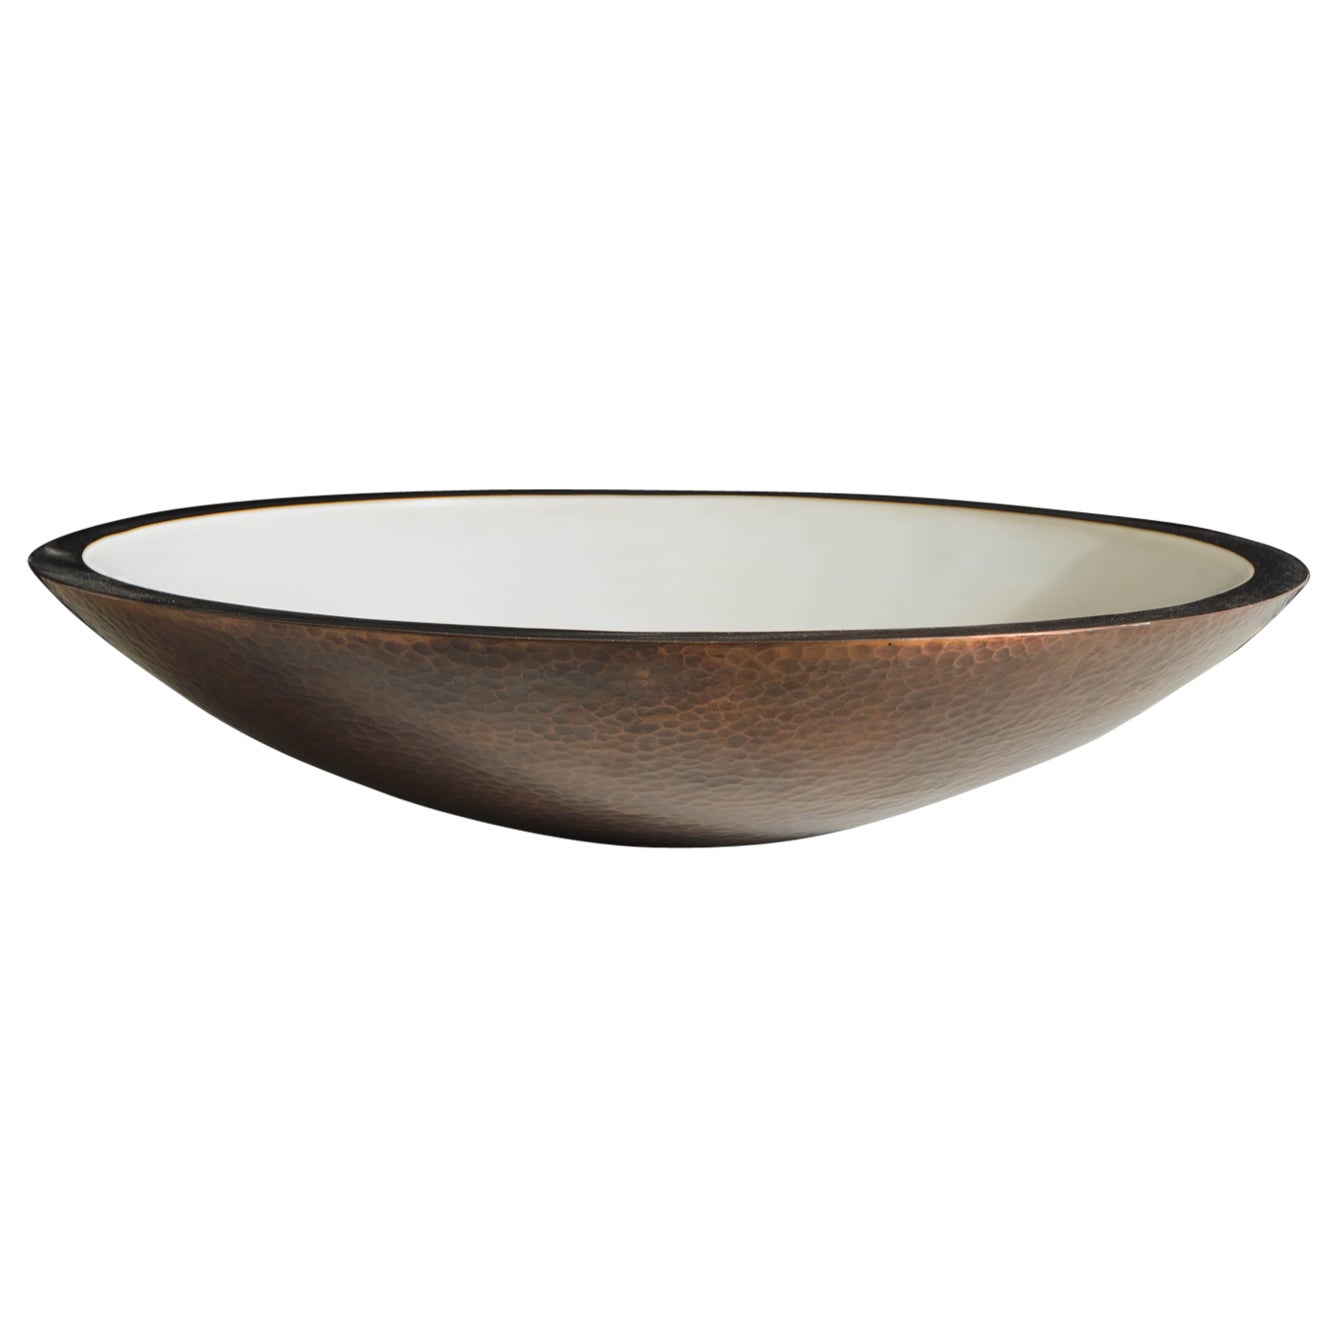 Contemporary Shallow Bowl in Cream Lacquer and Copper by Robert Kuo